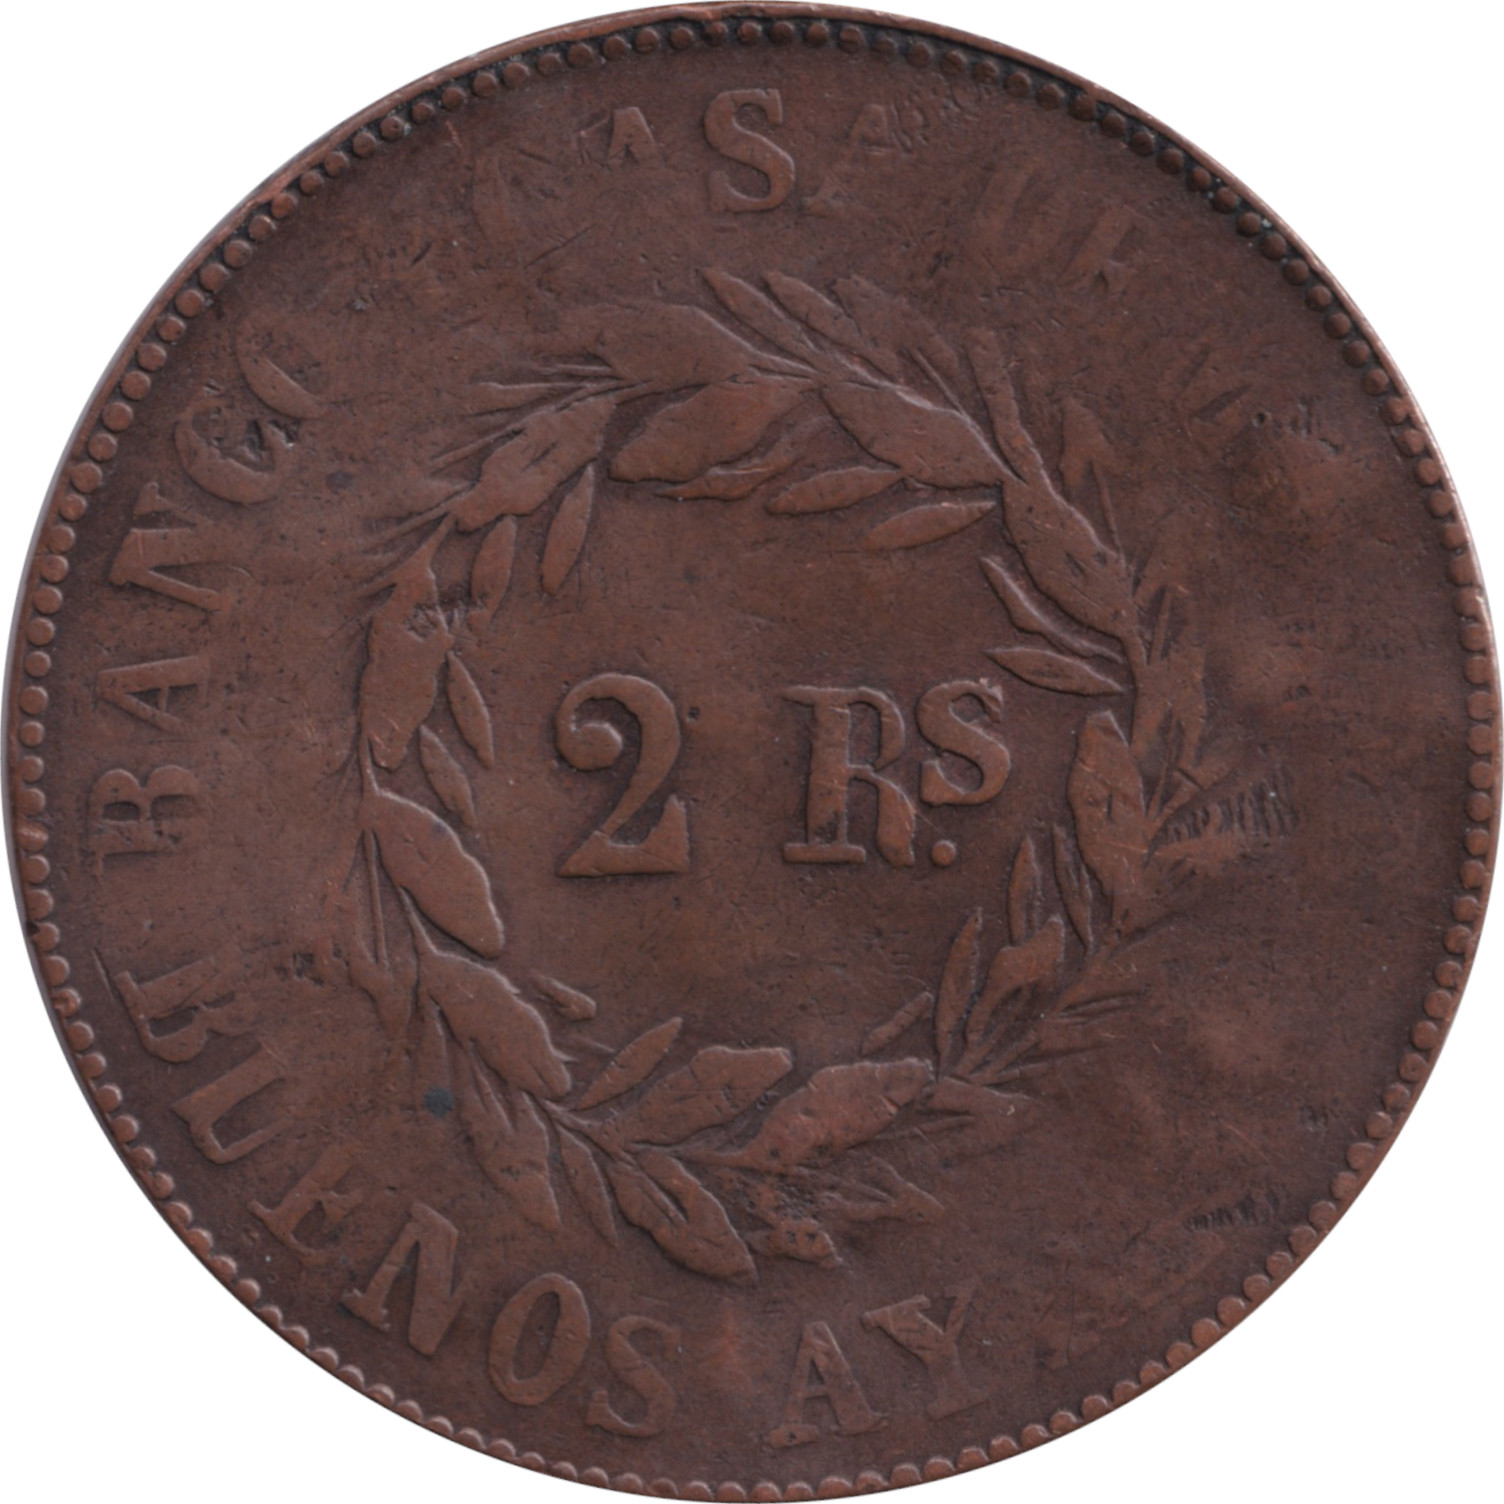 2 reales - Buenos Aires - 2Rs